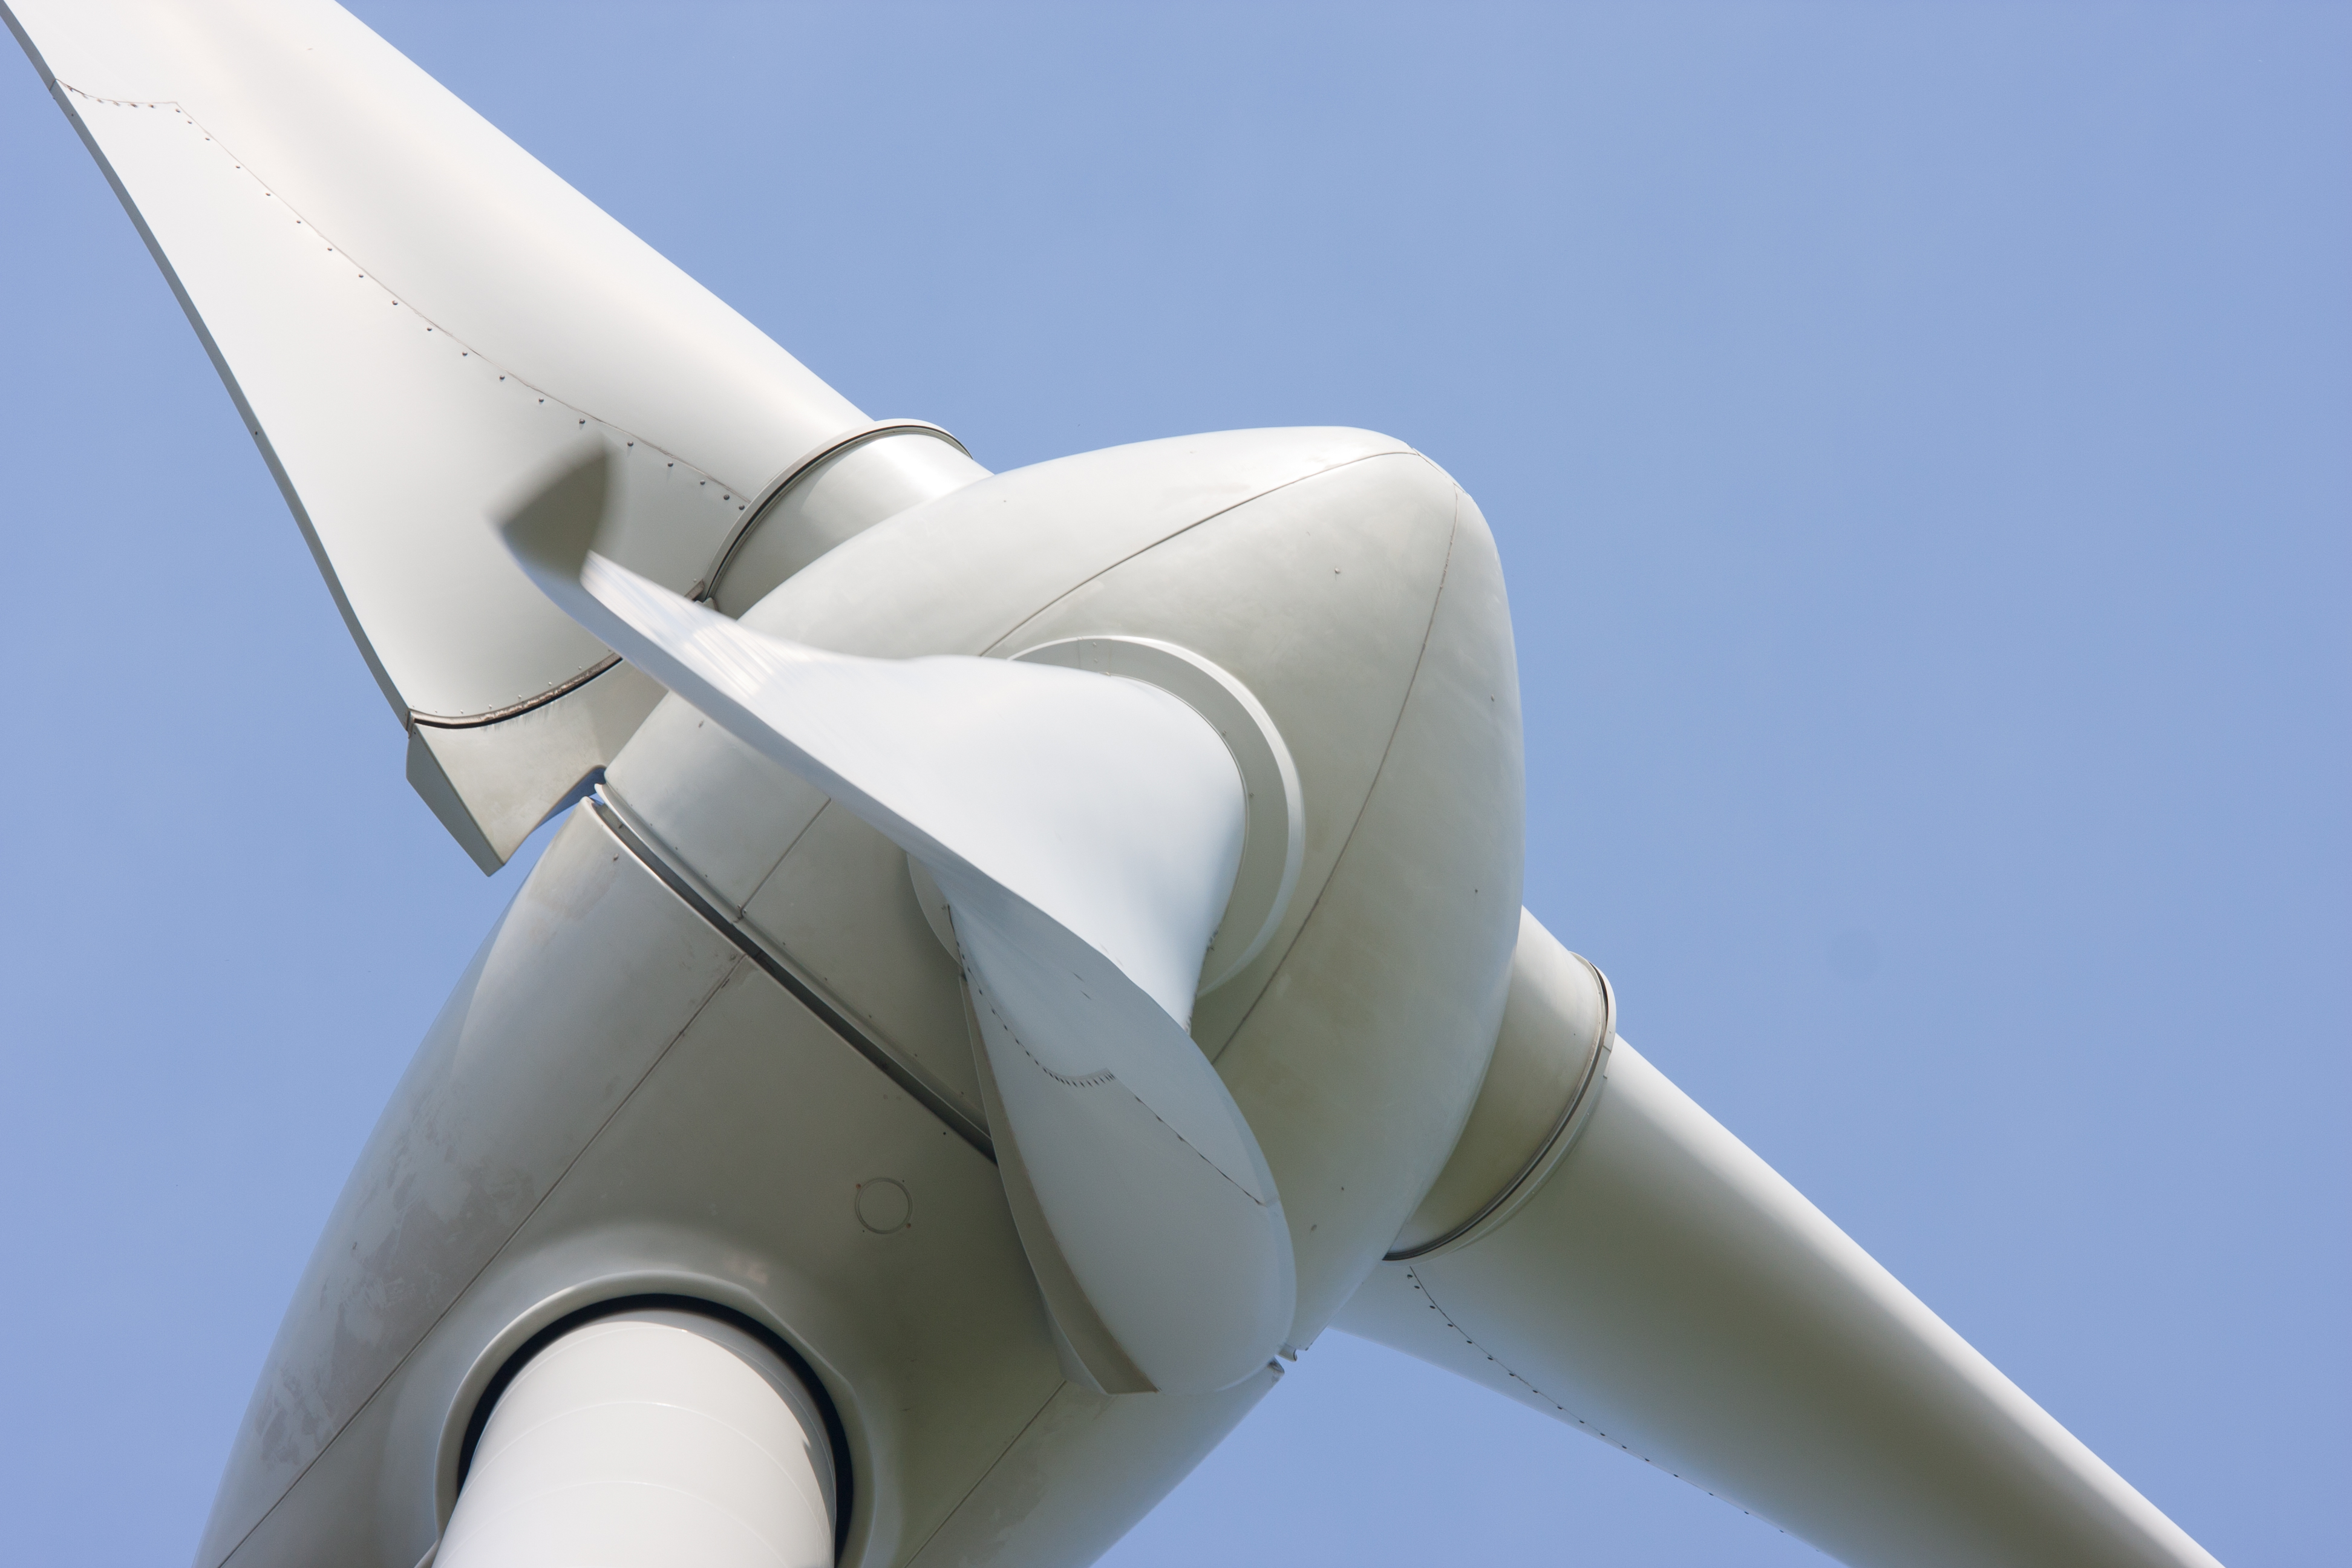 Molycorp will supply the rare earth materials for magnets which Siemens intends to utilize in its wind turbines.